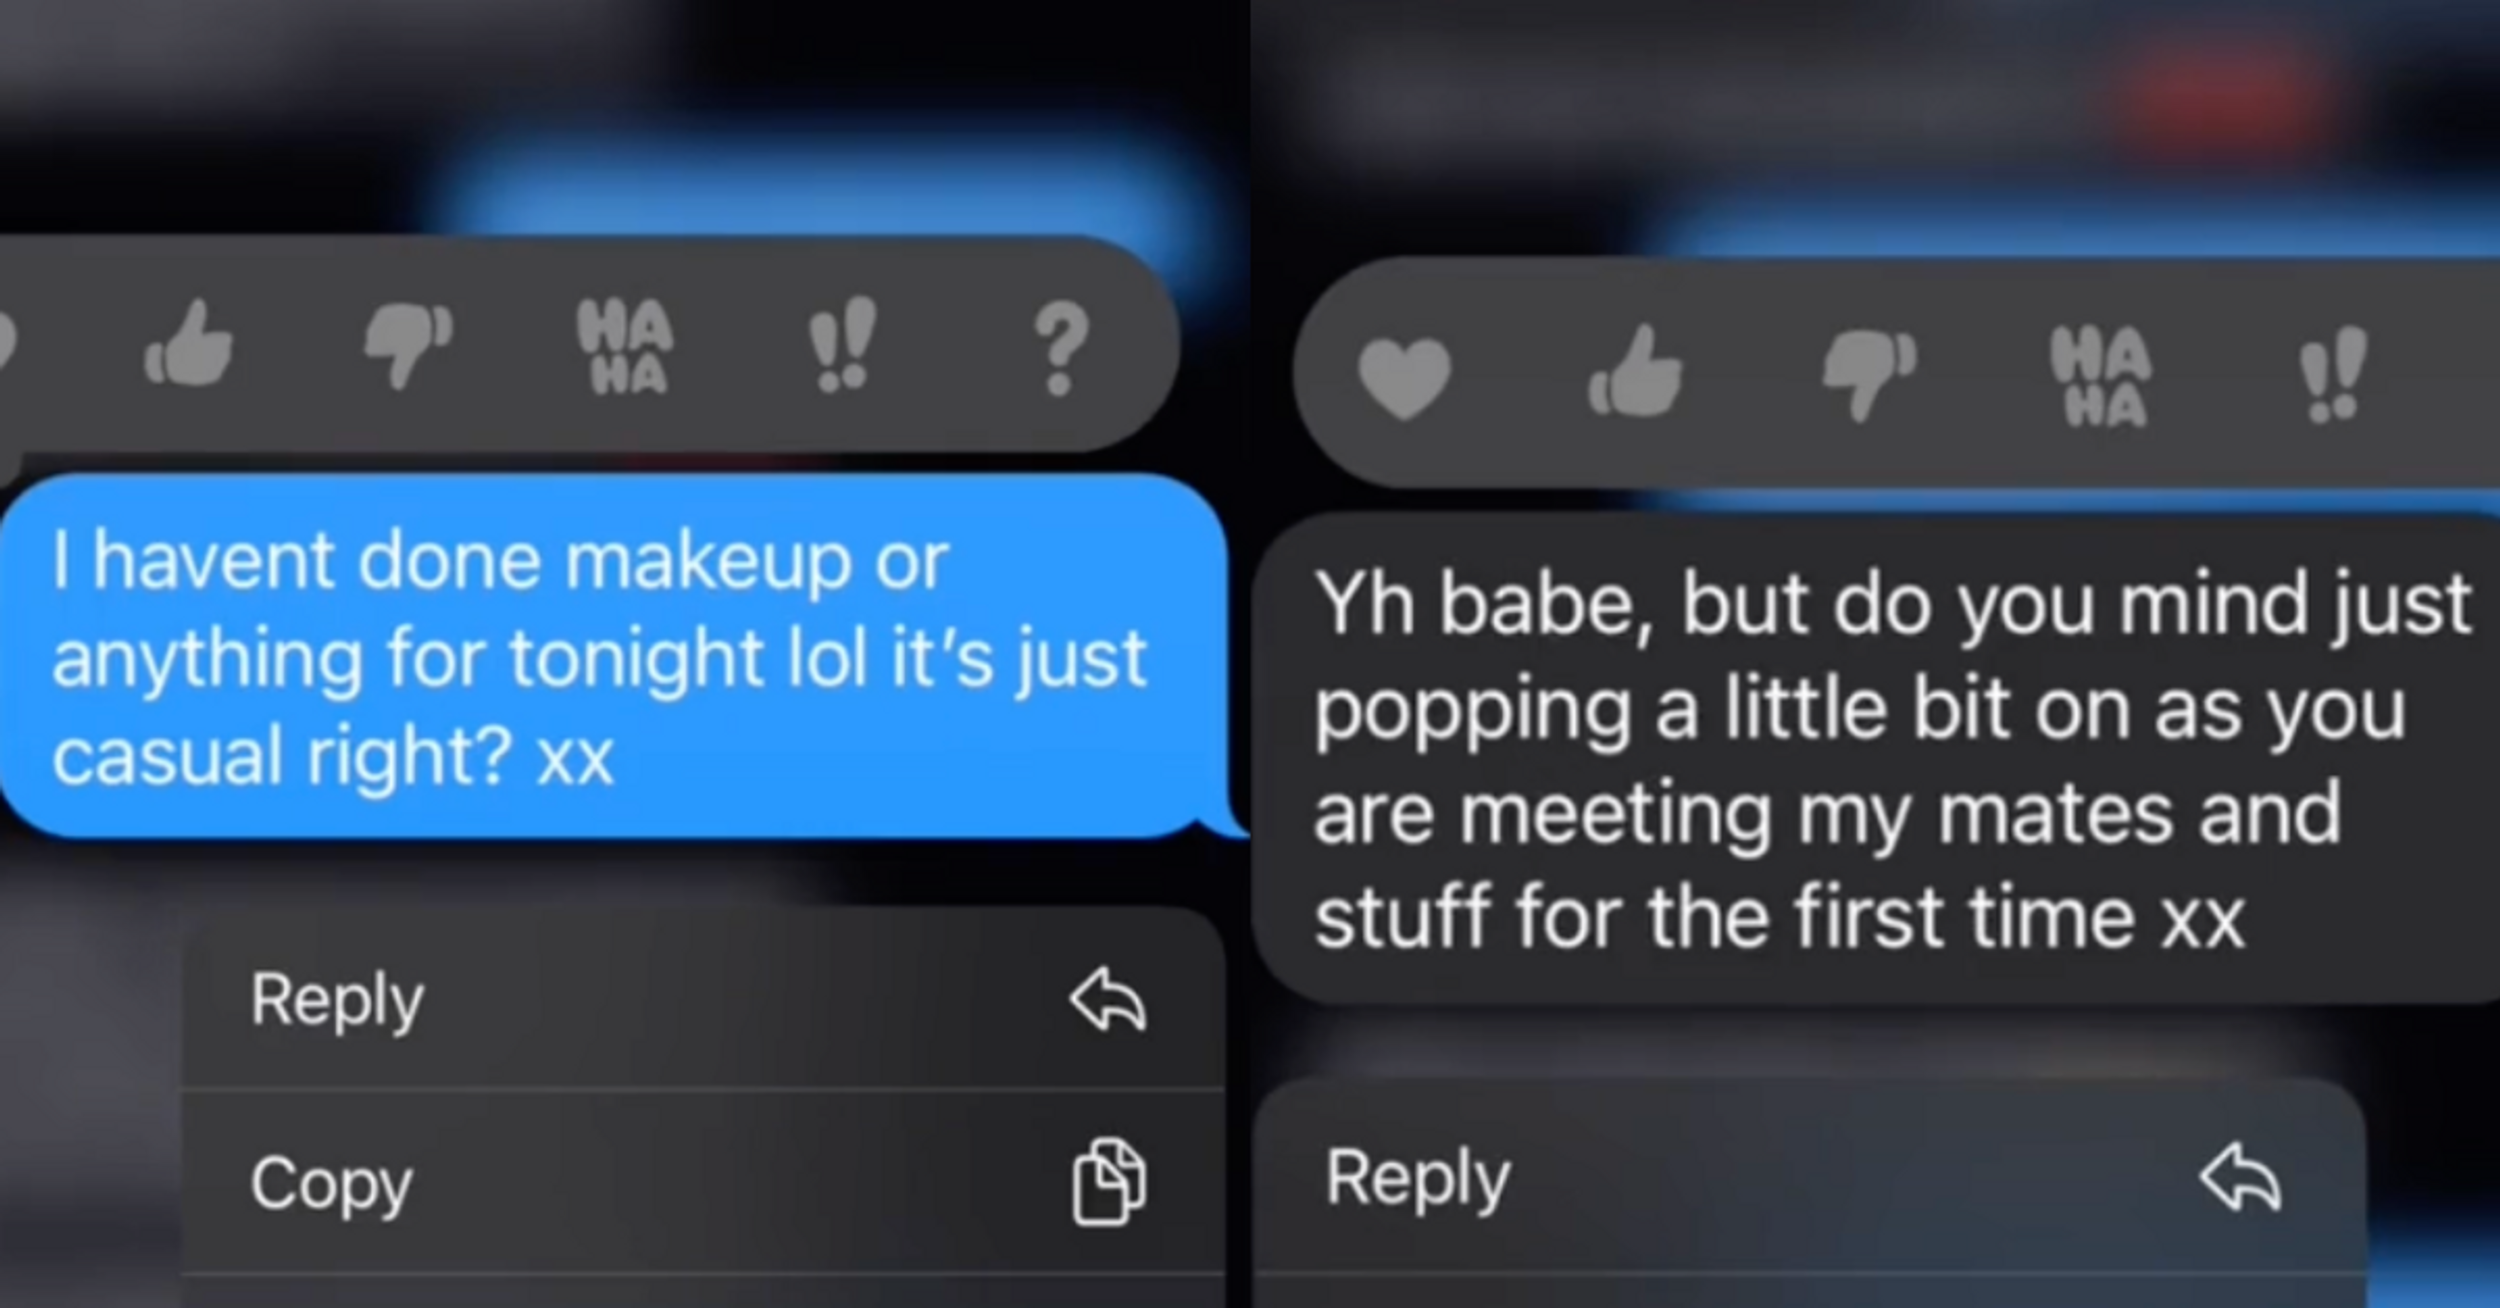 Woman Stunned After Boyfriend Tells Her To Put On Makeup To Meet His Friends For The First Time